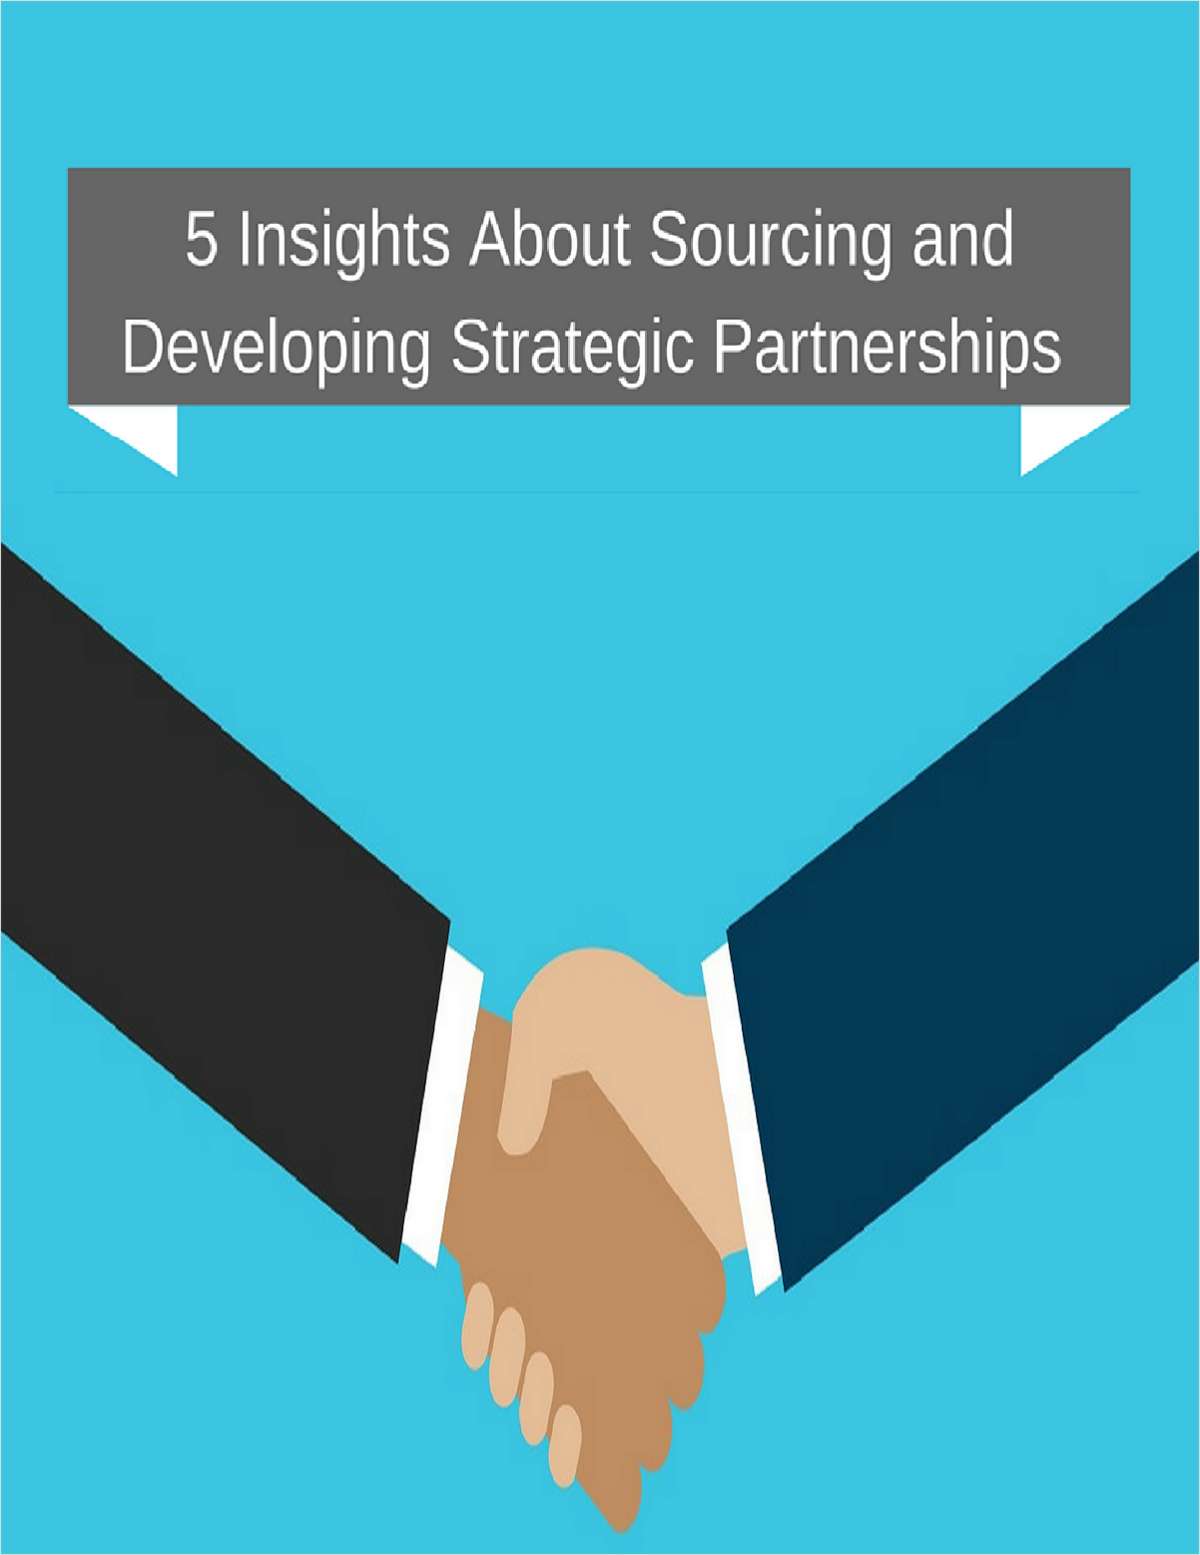 5 Insights About Sourcing and Developing Strategic Partnerships